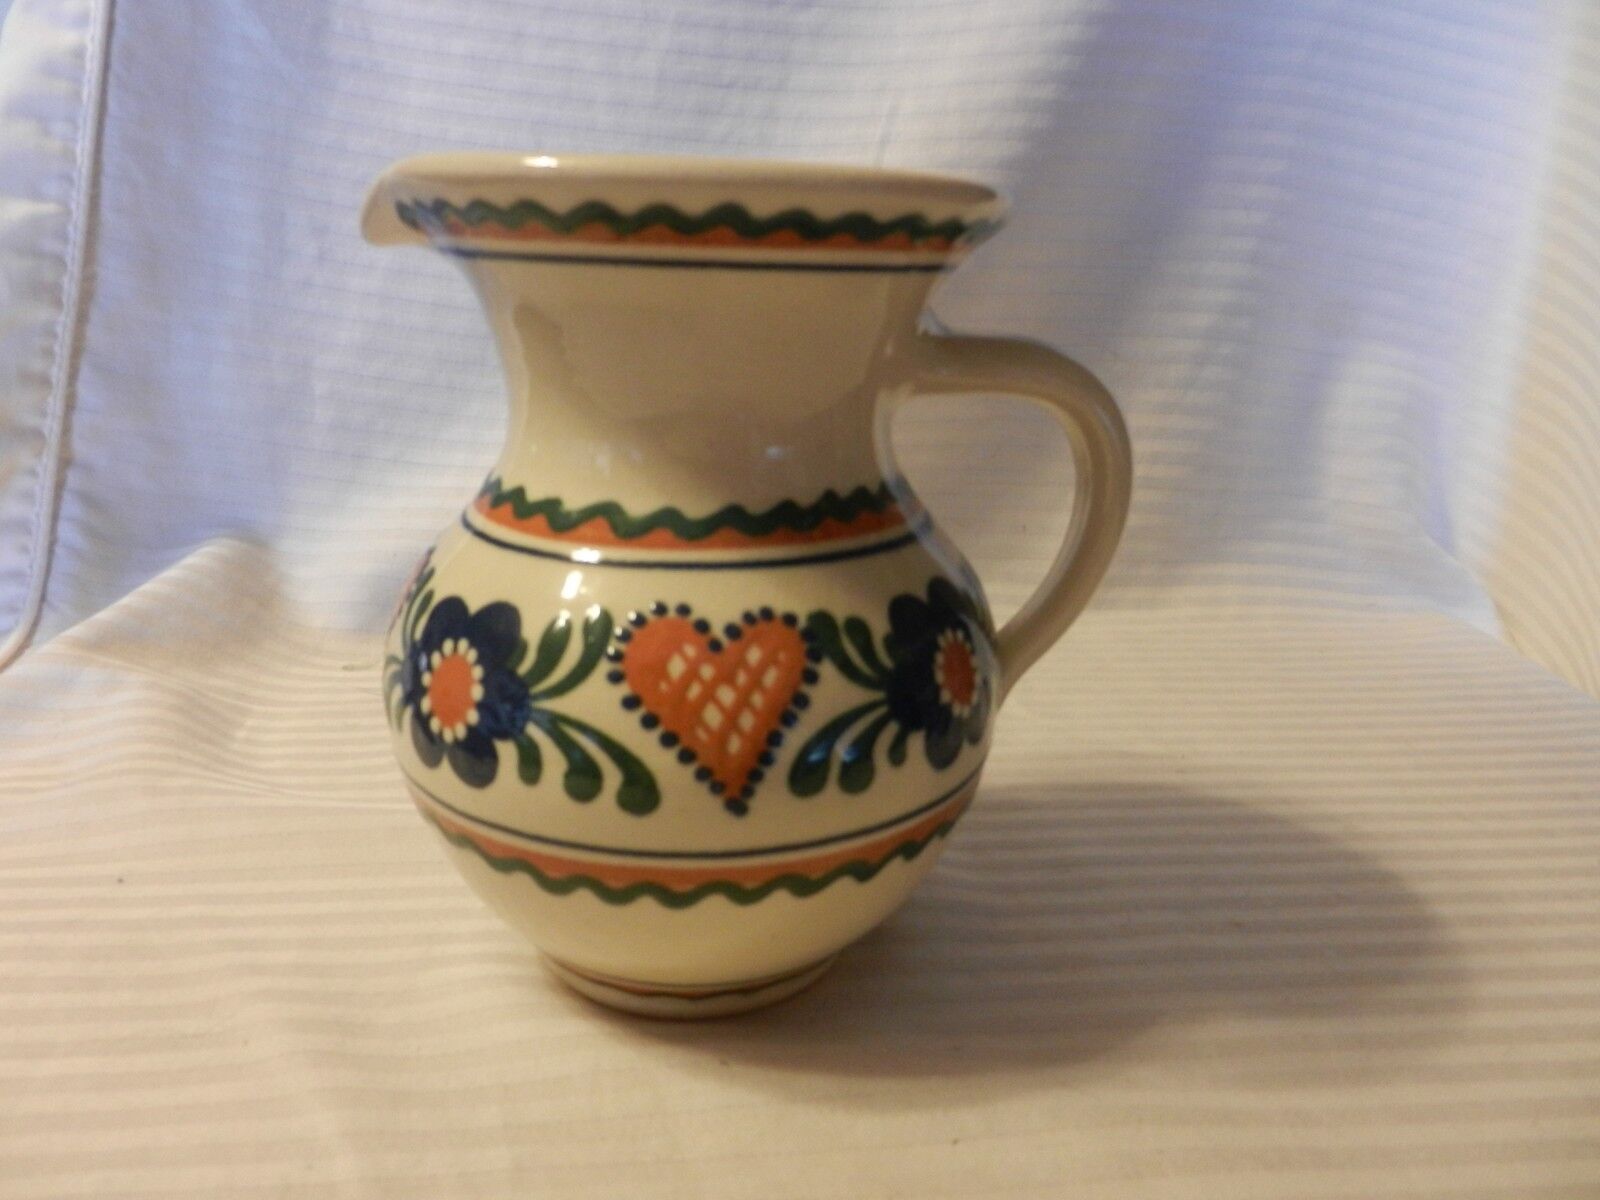 Small White Ceramic Pitcher Floral Embossed Design Blue, Green, Tan 5.75\